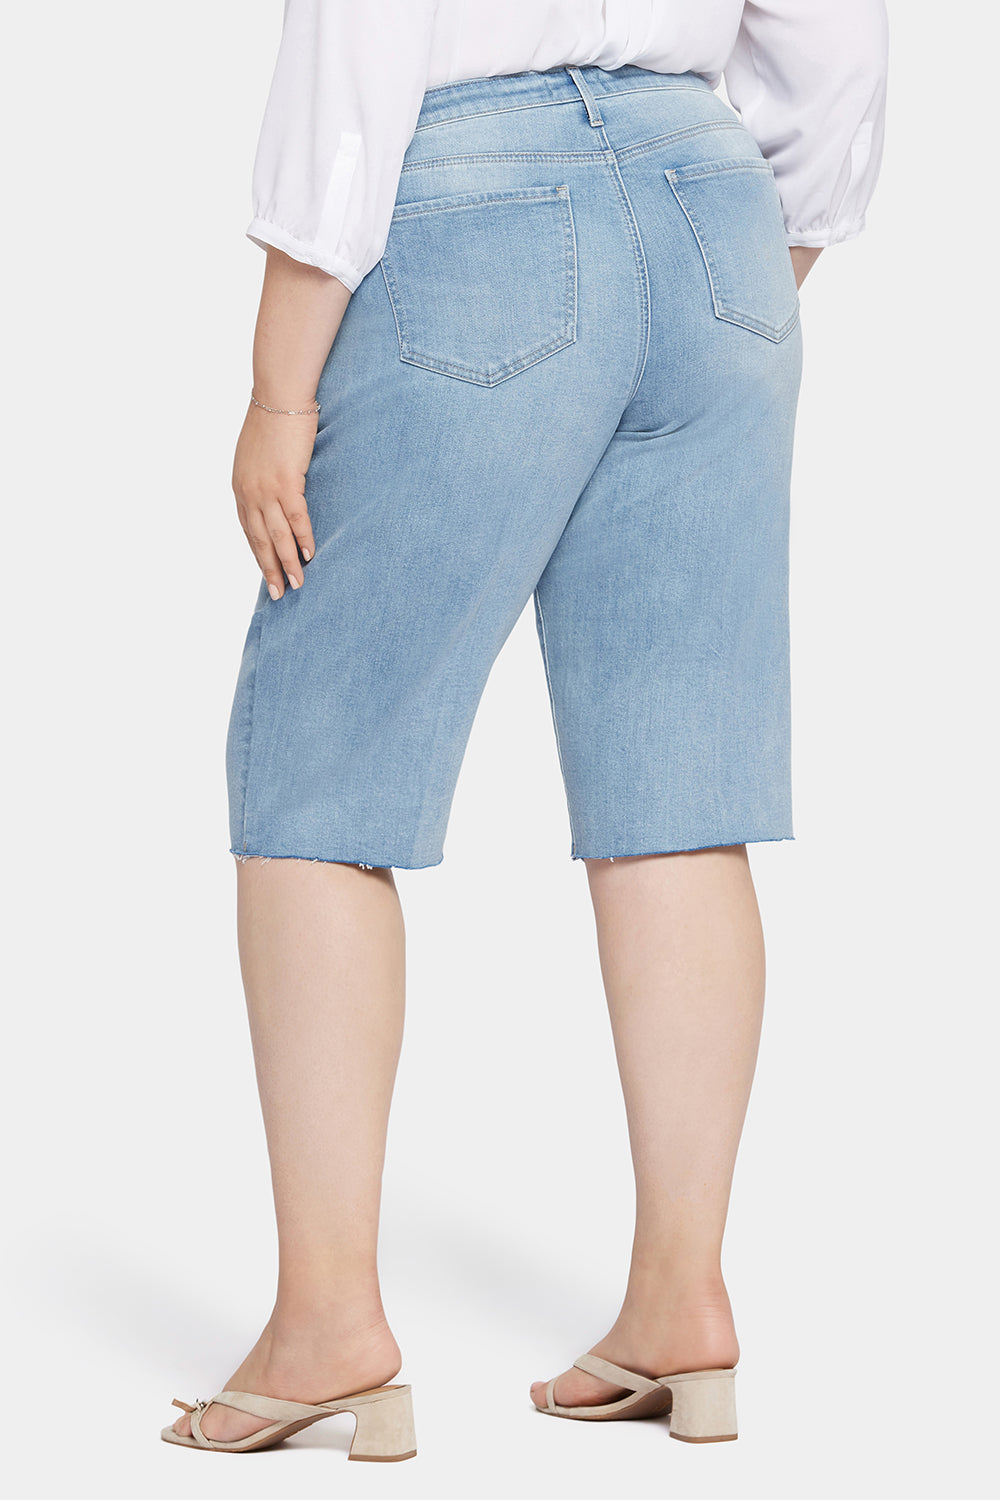 NYDJ Kristie 80s Bermuda Denim Shorts In Plus Size With Pressed Creases And Raw Hems - Afterglow